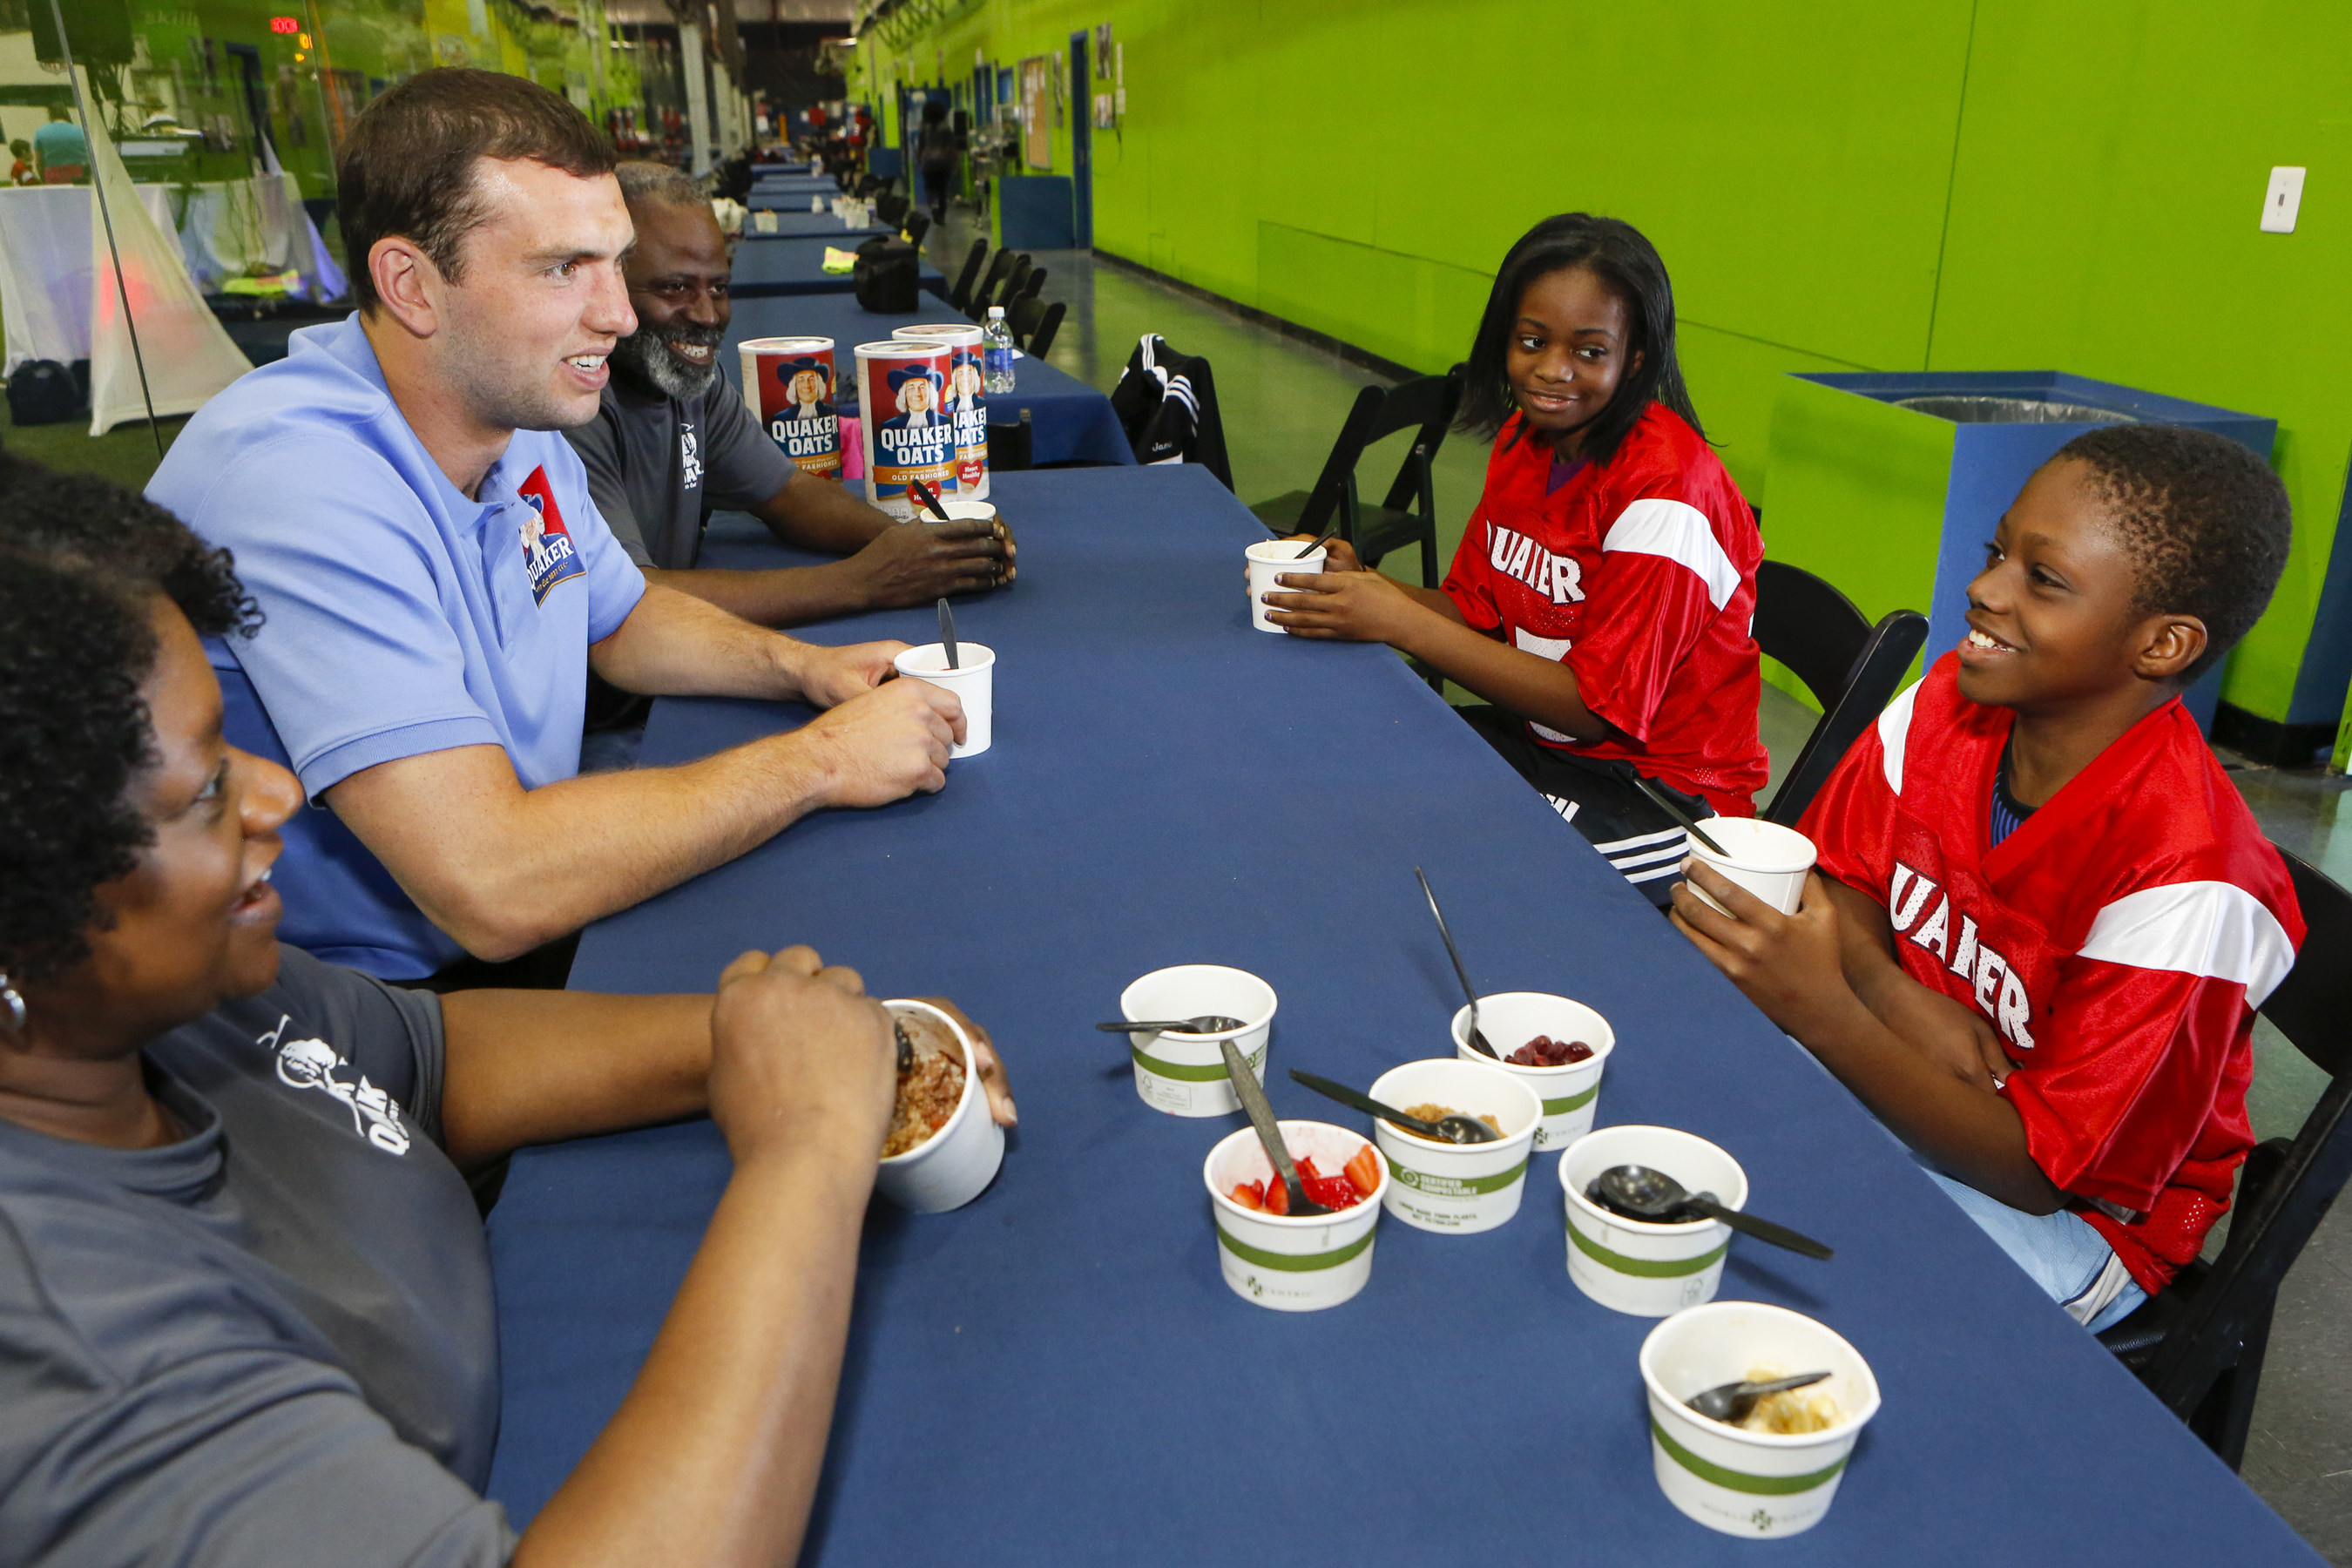 Indianapolis Colts quarterback Andrew Luck, second from left, enjoys an oatmeal breakfast with a local Philadelphia family, the Loftons, winners of the national Quaker "Make the Play" contest aimed at inspiring families to get out and play together on Saturday, April 18, 2015, in Hatboro, Pa.